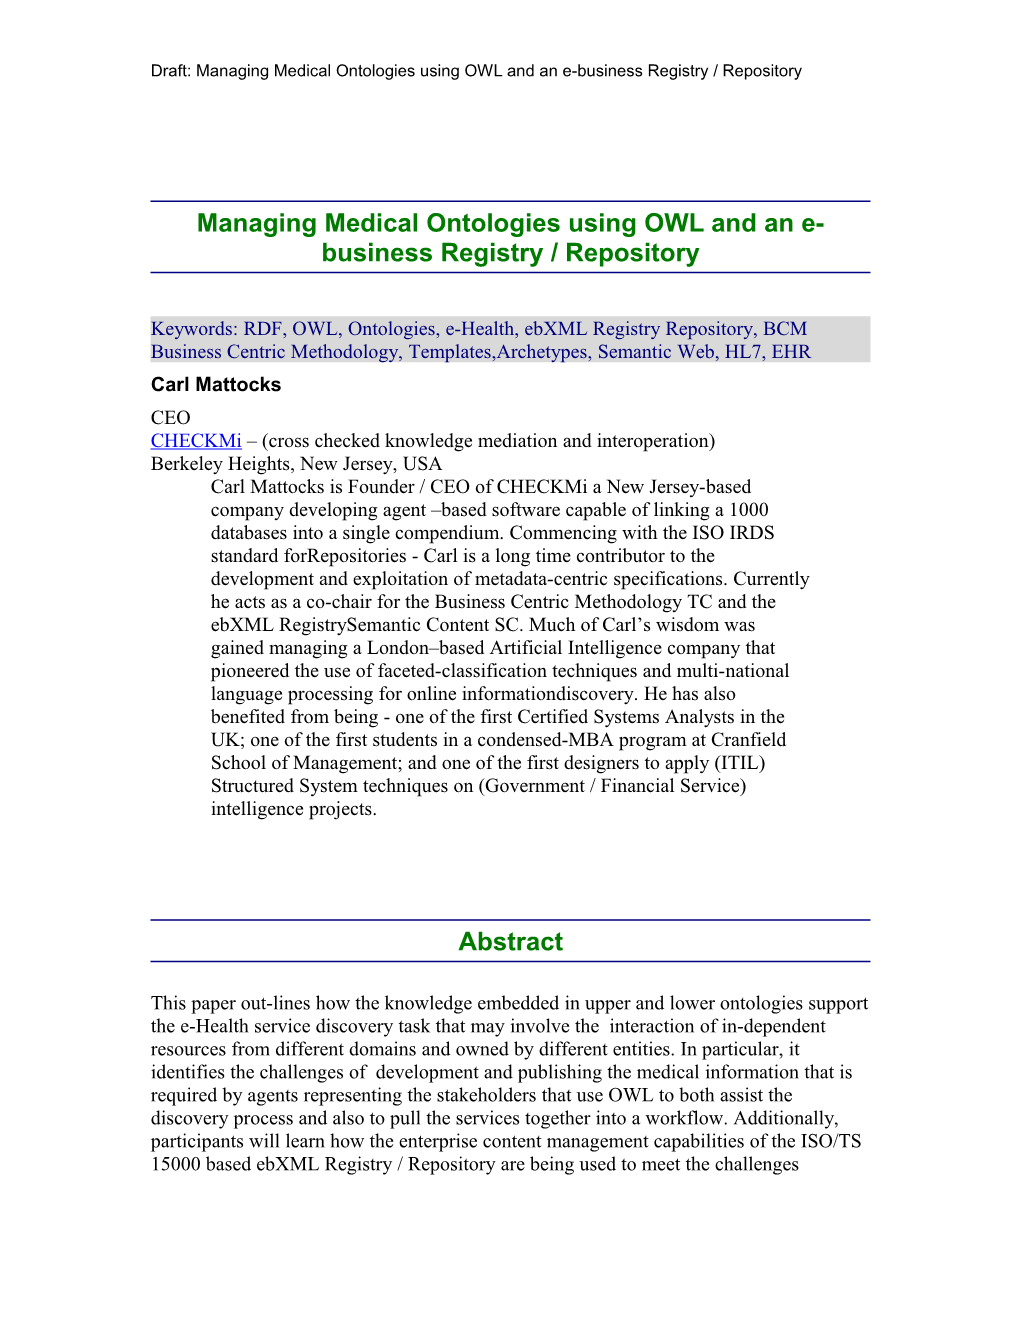 Managing Medical Ontologies Using OWL and an E-Business Registry / Repository